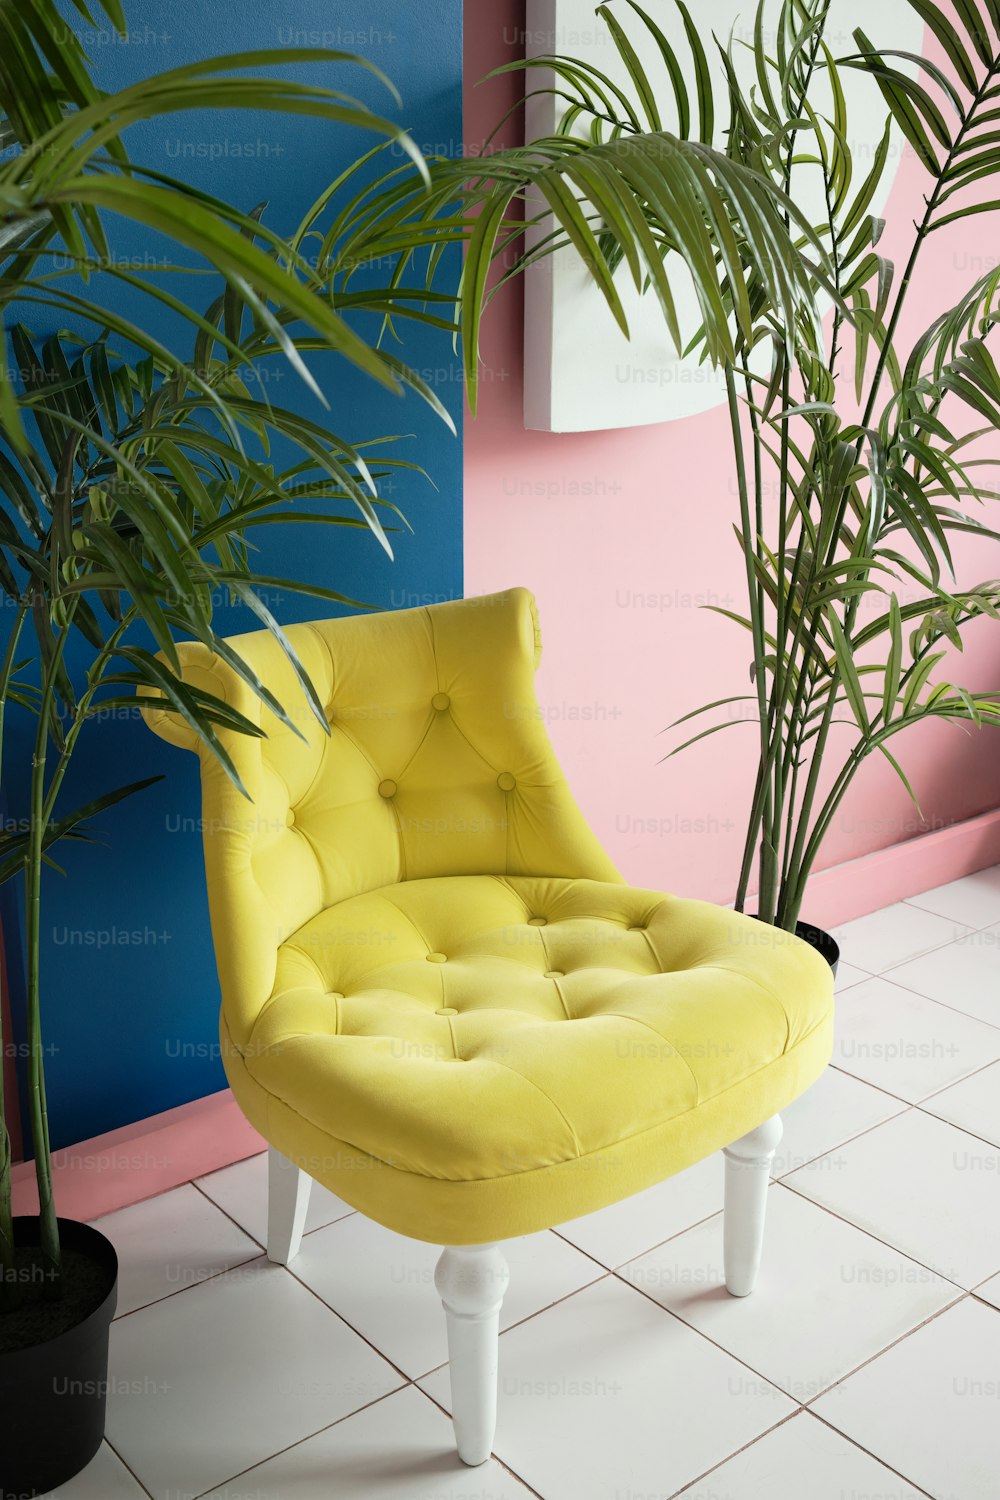 a yellow chair sitting next to a potted plant